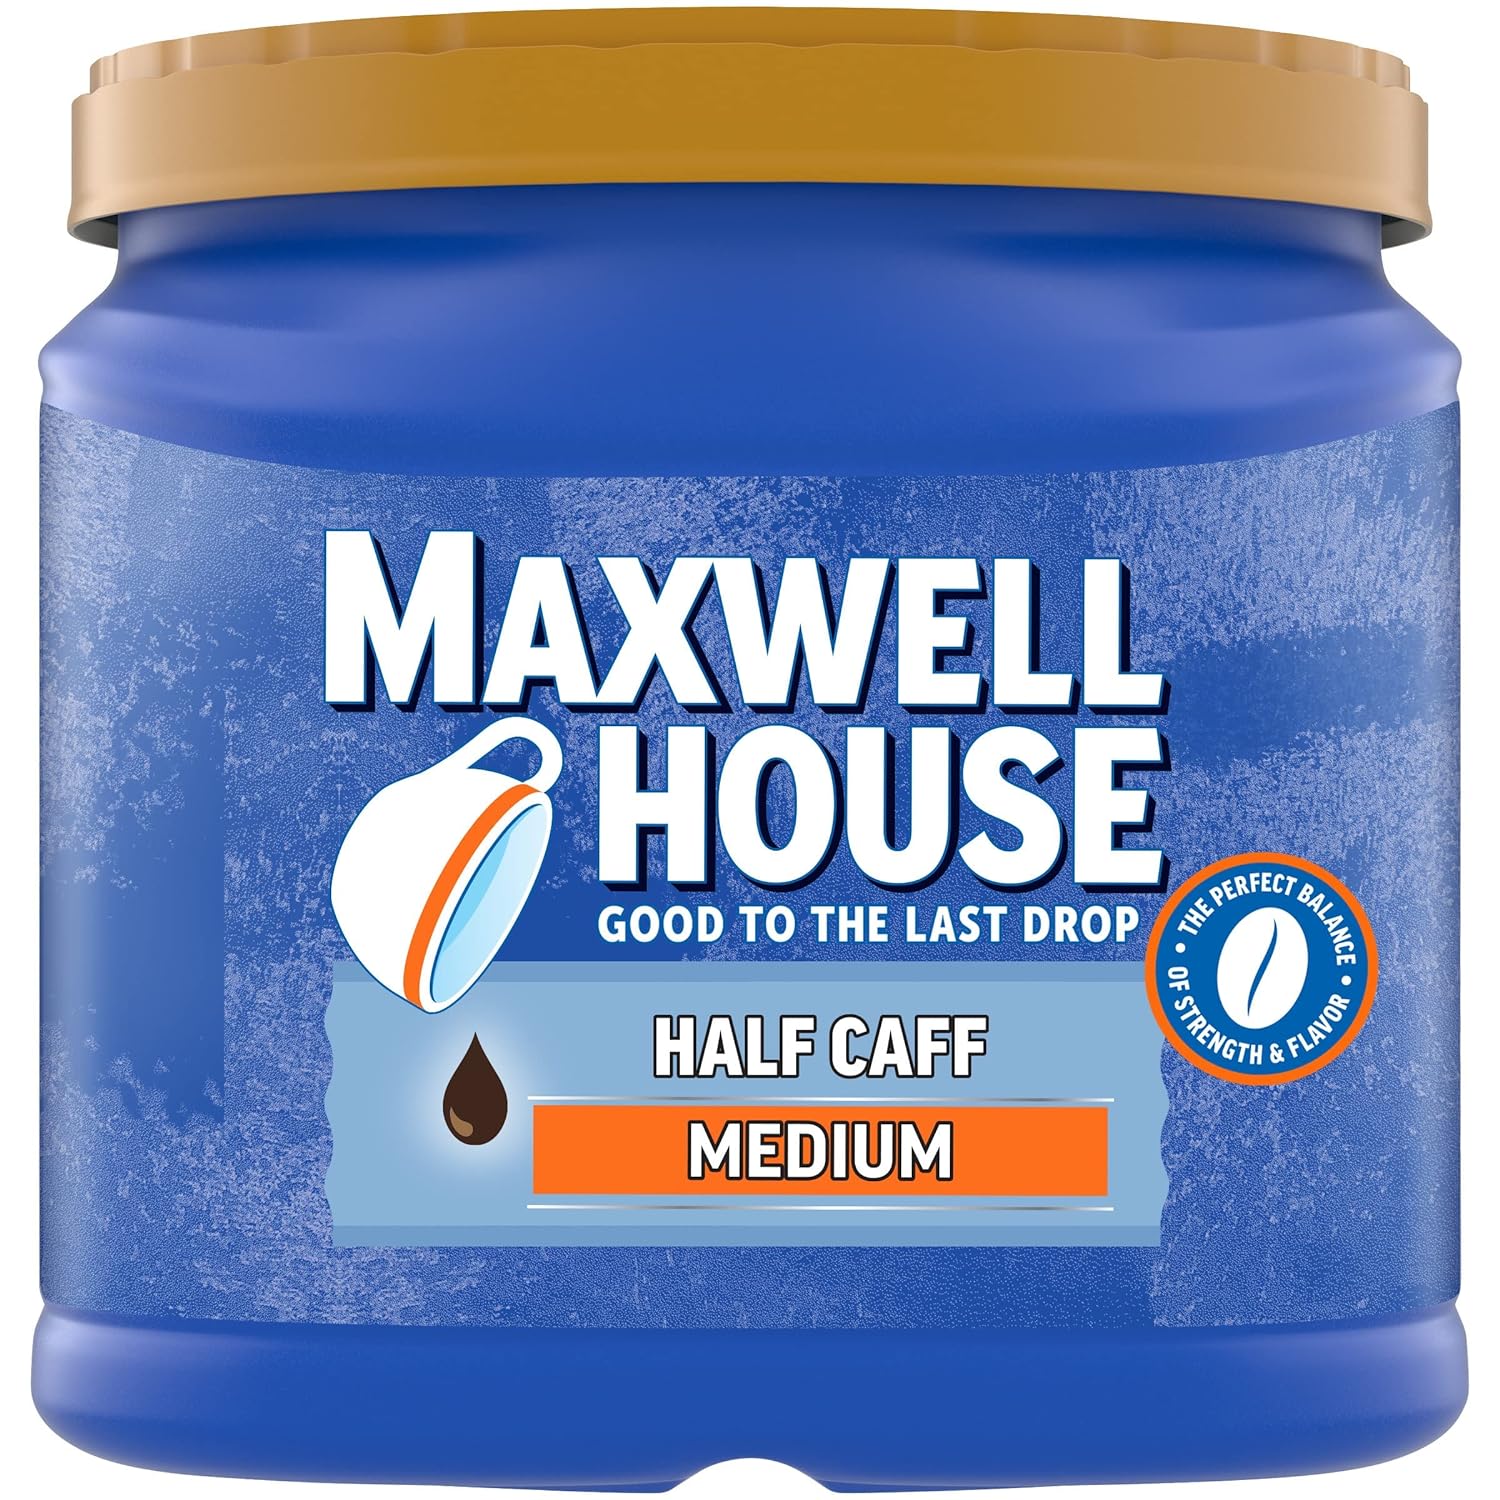 It is hard to find 1/2 decaf coffee in my supermarket . Maxwell House has always been a favorite brand so finding this was great. The price is very good and even better with subscribe and save. I love its aroma